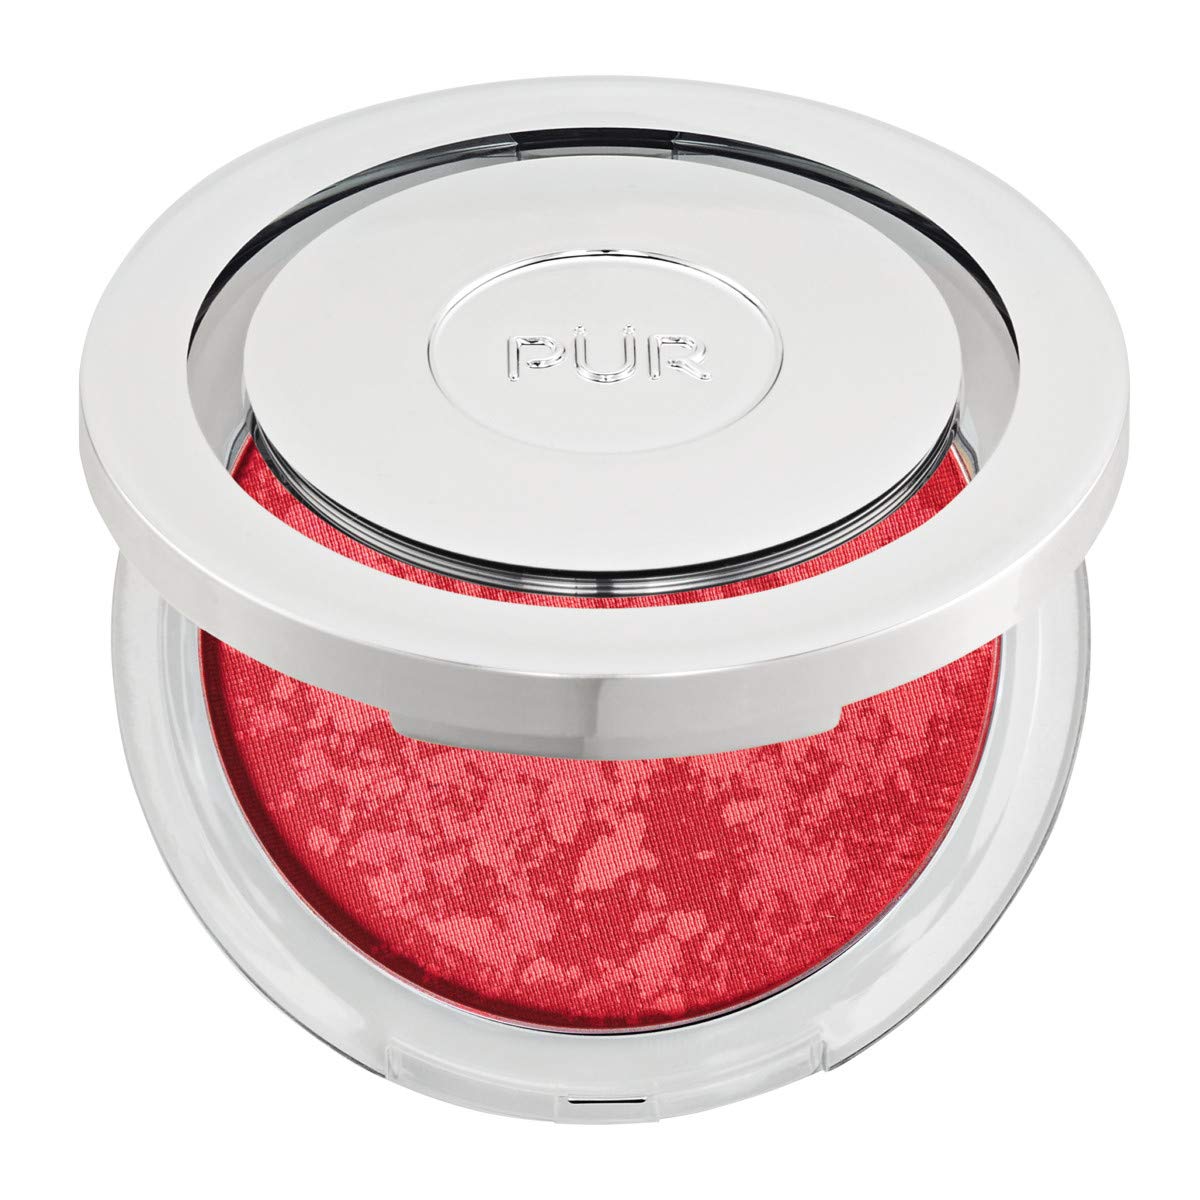 Picture of Pur Minerals 252119 Skin Perfecting Powder - No. Berry Beautiful - 8 g